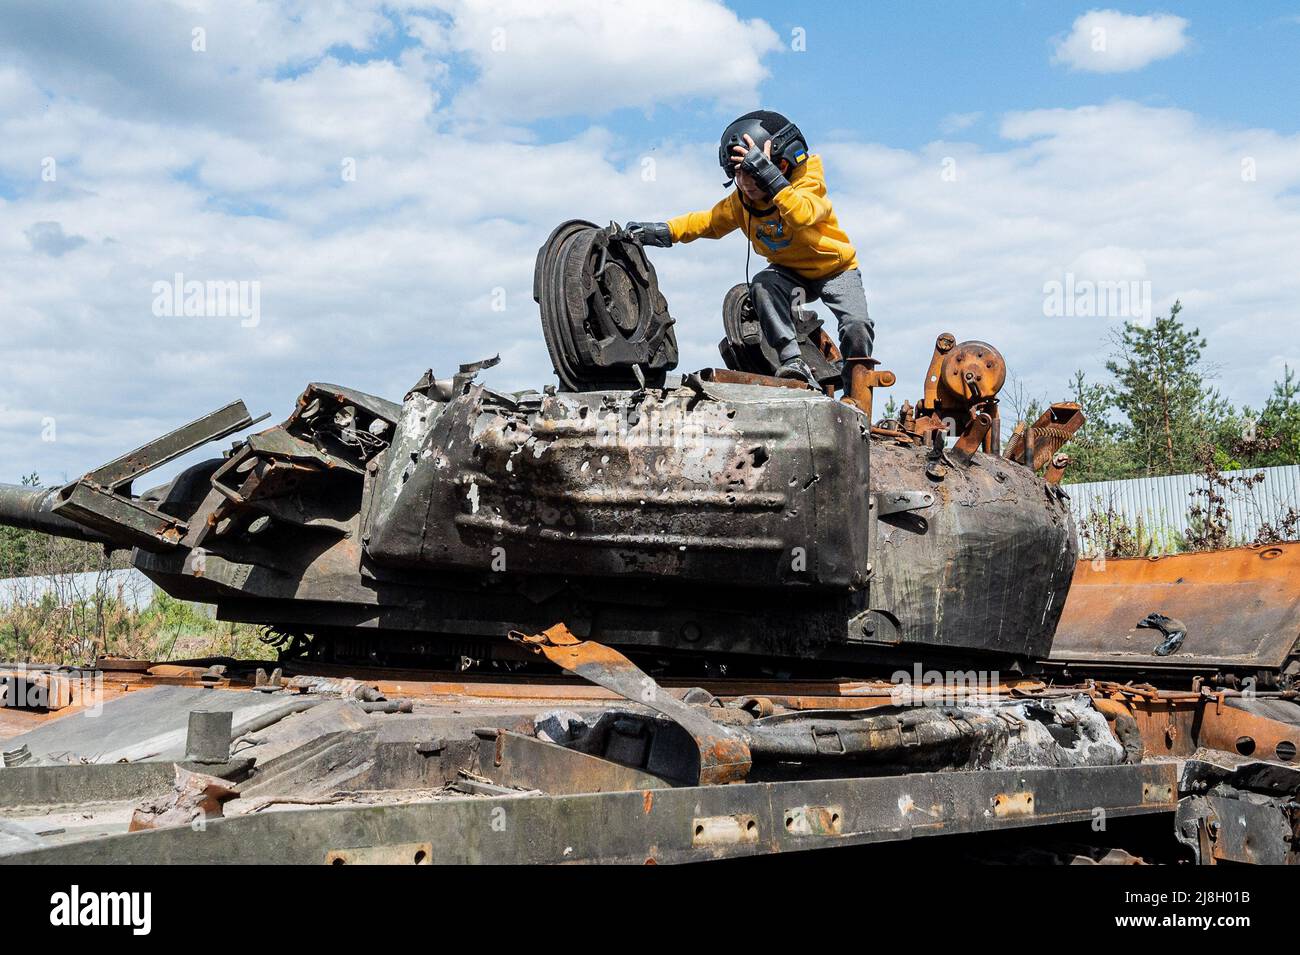 Nalyvaikivka, Ukraine. 15th May, 2022. A child examining a destroyed Russian tank in Nalyvaikivka. Credit: SOPA Images Limited/Alamy Live News Stock Photo